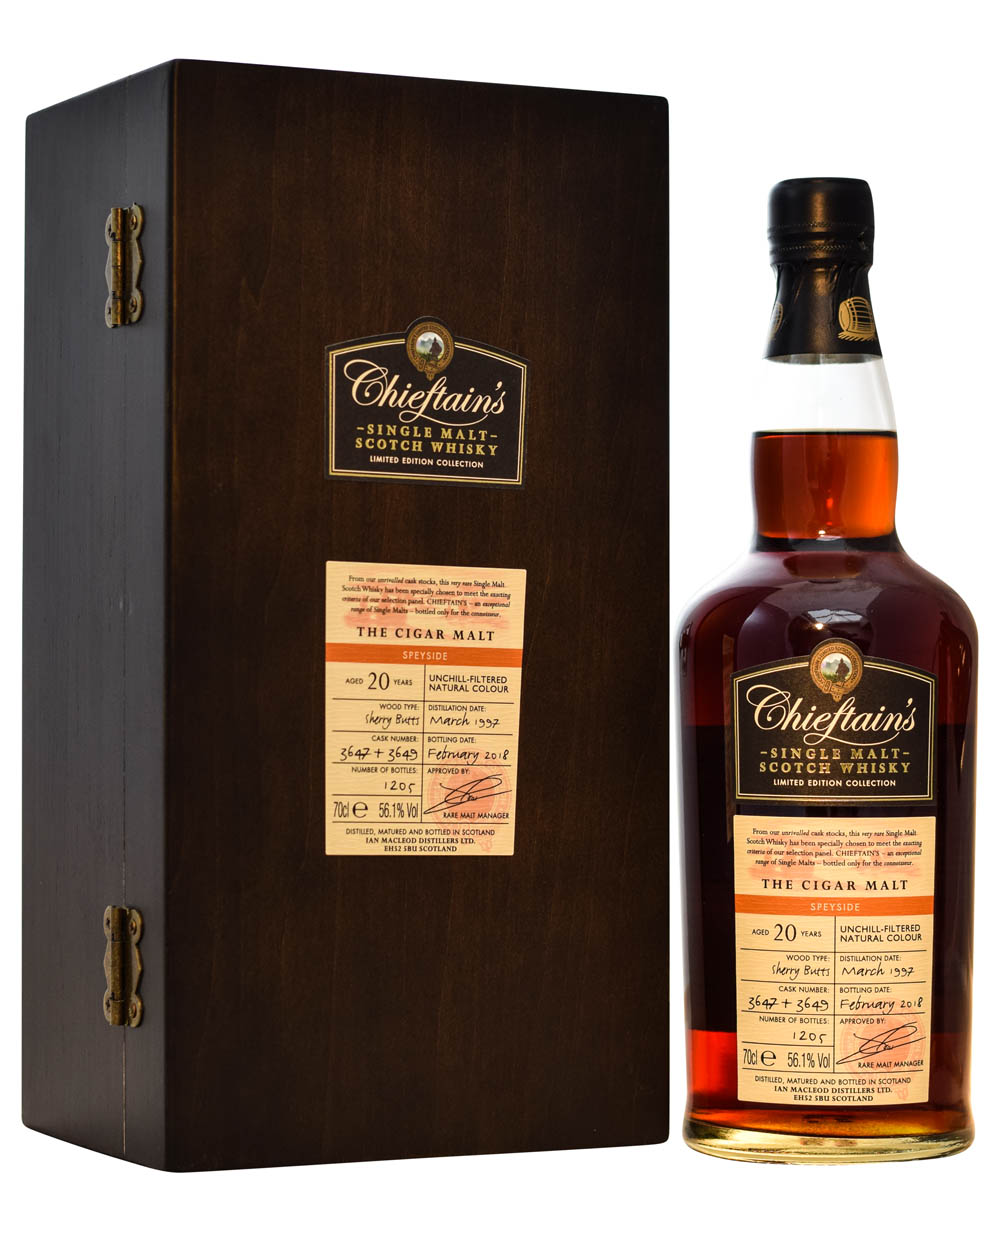 The Sigar Malt (Mortlach) 1997 Chieftain’s (20 Years Old) - Box Musthave Malts MHM